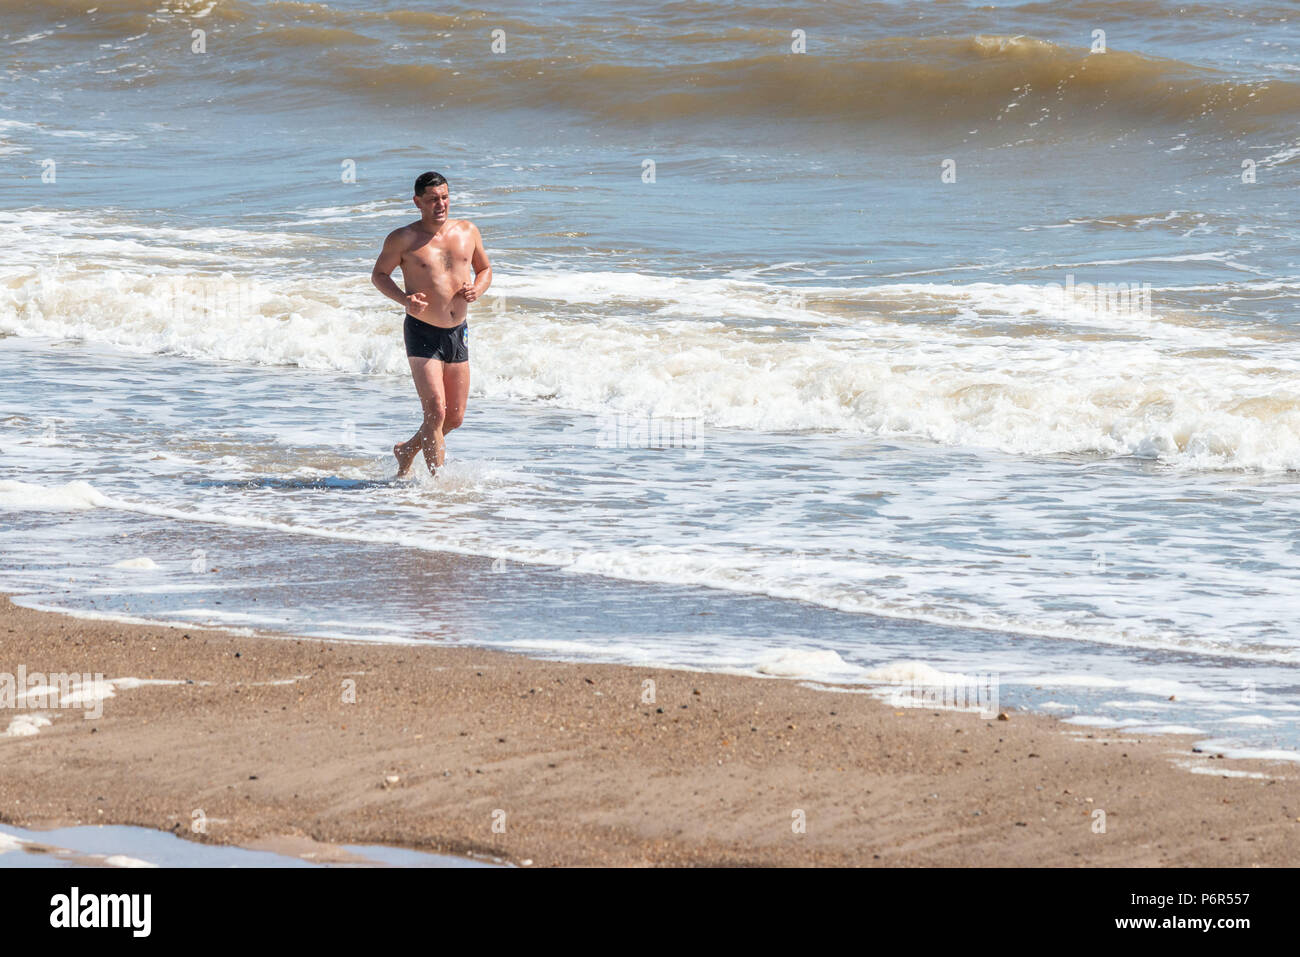 Skegness, UK, 2nd July 2018. A man jogging on the beach uses the incoming waves to keep himself cool, as the continued hot weather keeps temperatures in the UK at a high. Credit: Steven Booth/Alamy Live News. Stock Photo